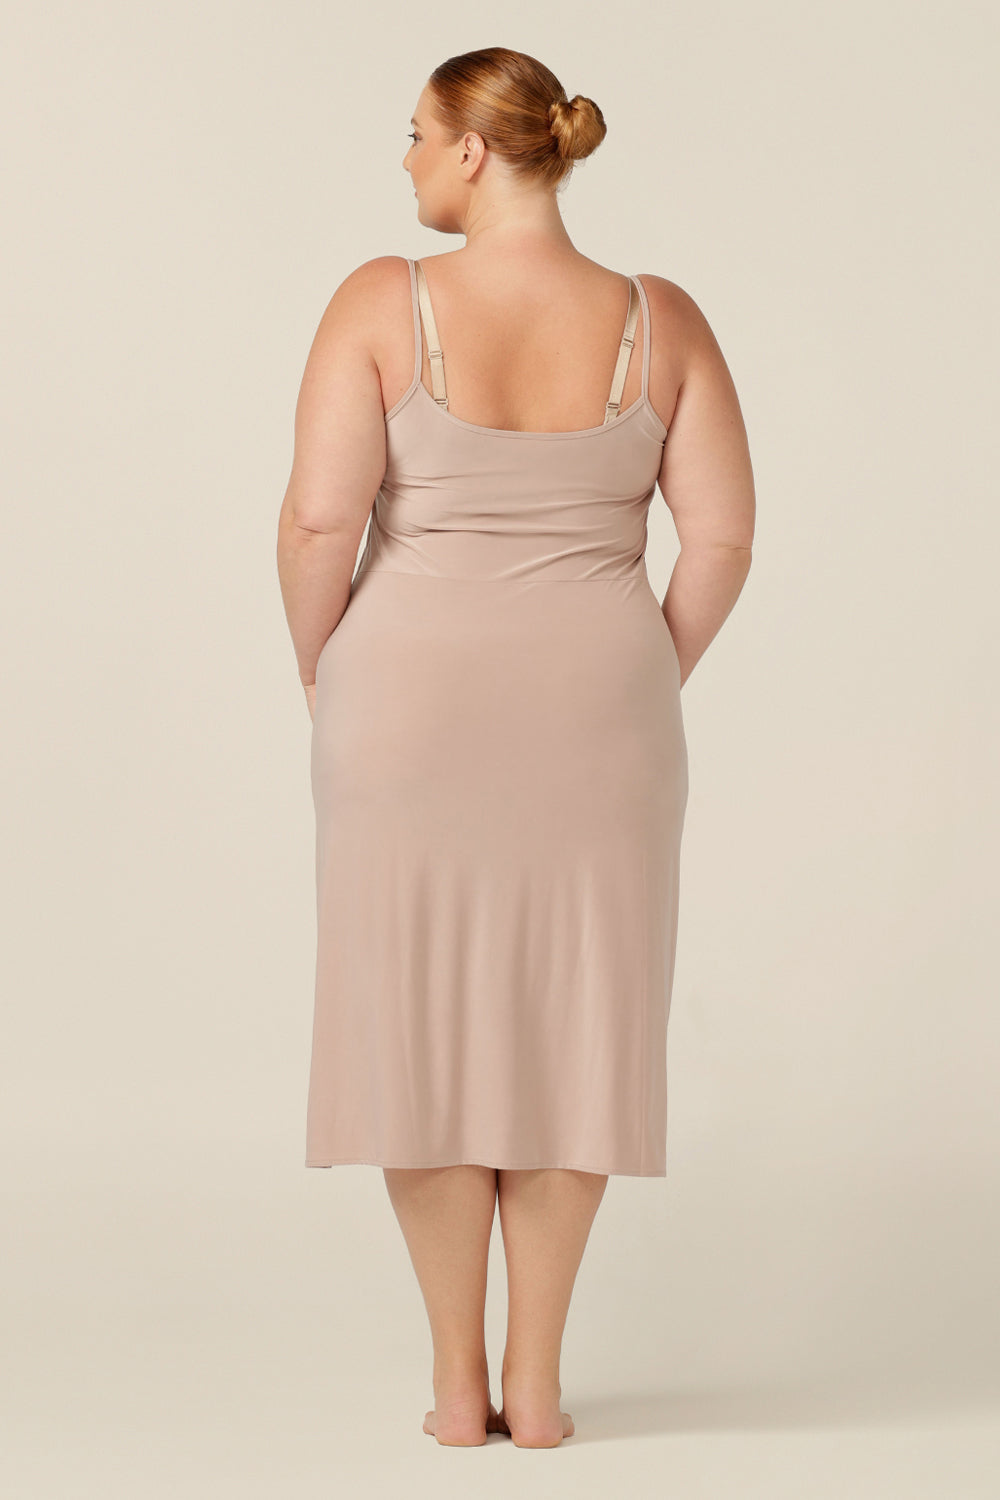 A fuller figure woman wears a flesh-coloured, midi-length, reversible slip in slinky jersey. Worn with a V neck to the front, and scoop neck to the back. With a skirt length finishing below the knee, this midi slip gives a smooth layer under dresses and skirts.